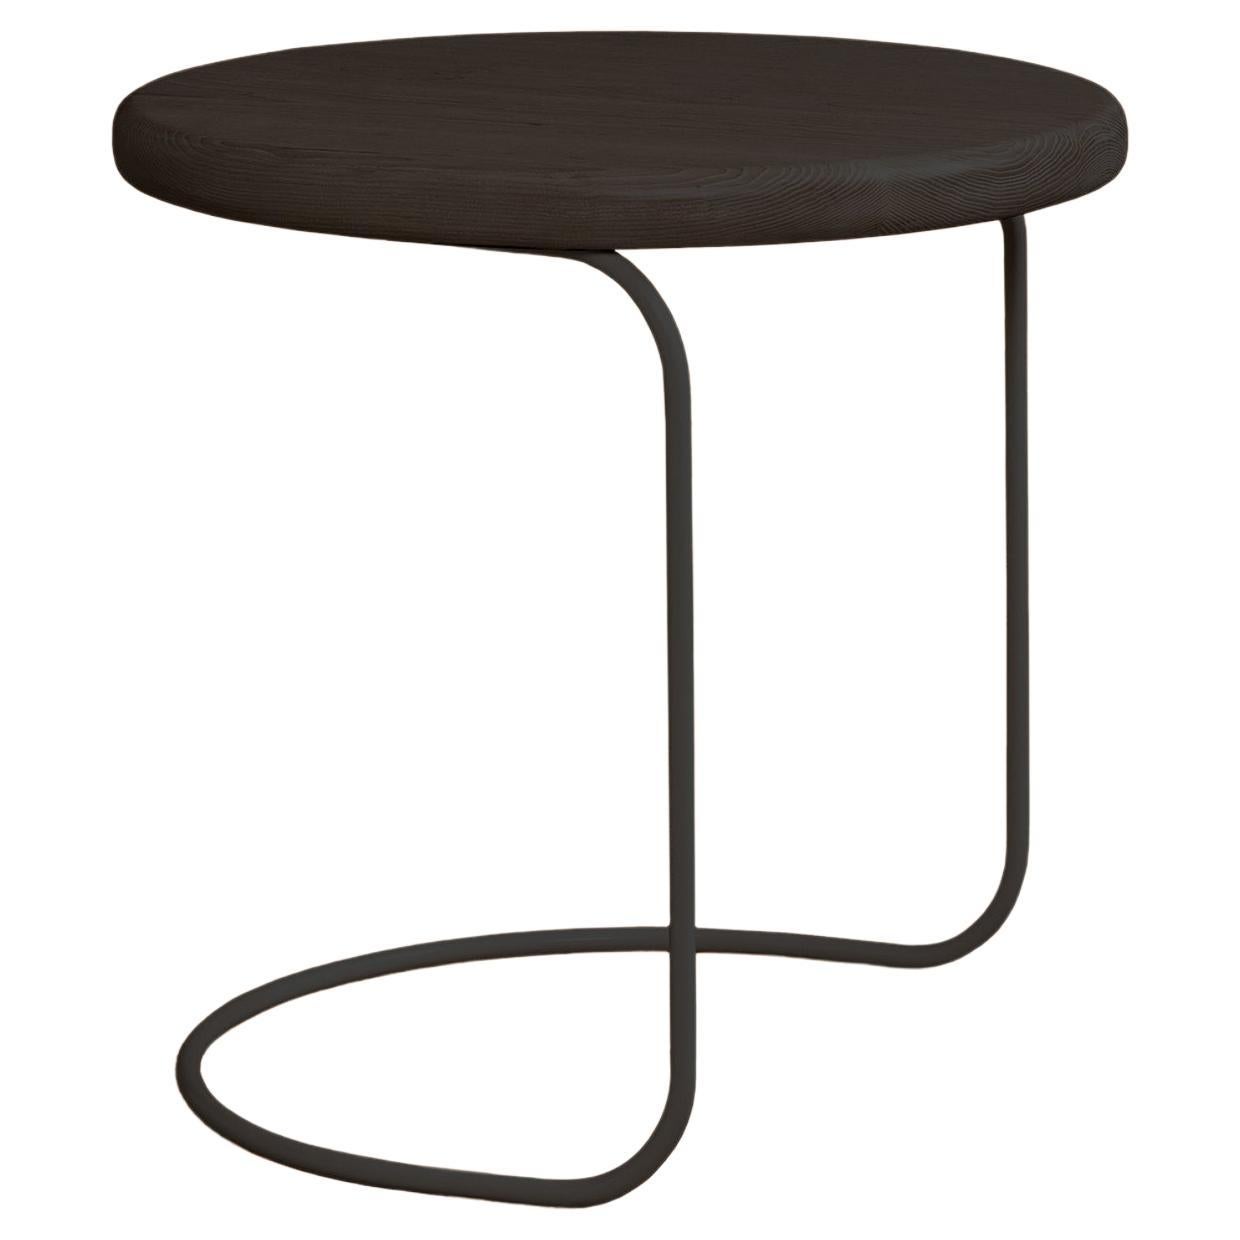 Minimalist Contemporary Wood and Metal Round Side Table For Sale